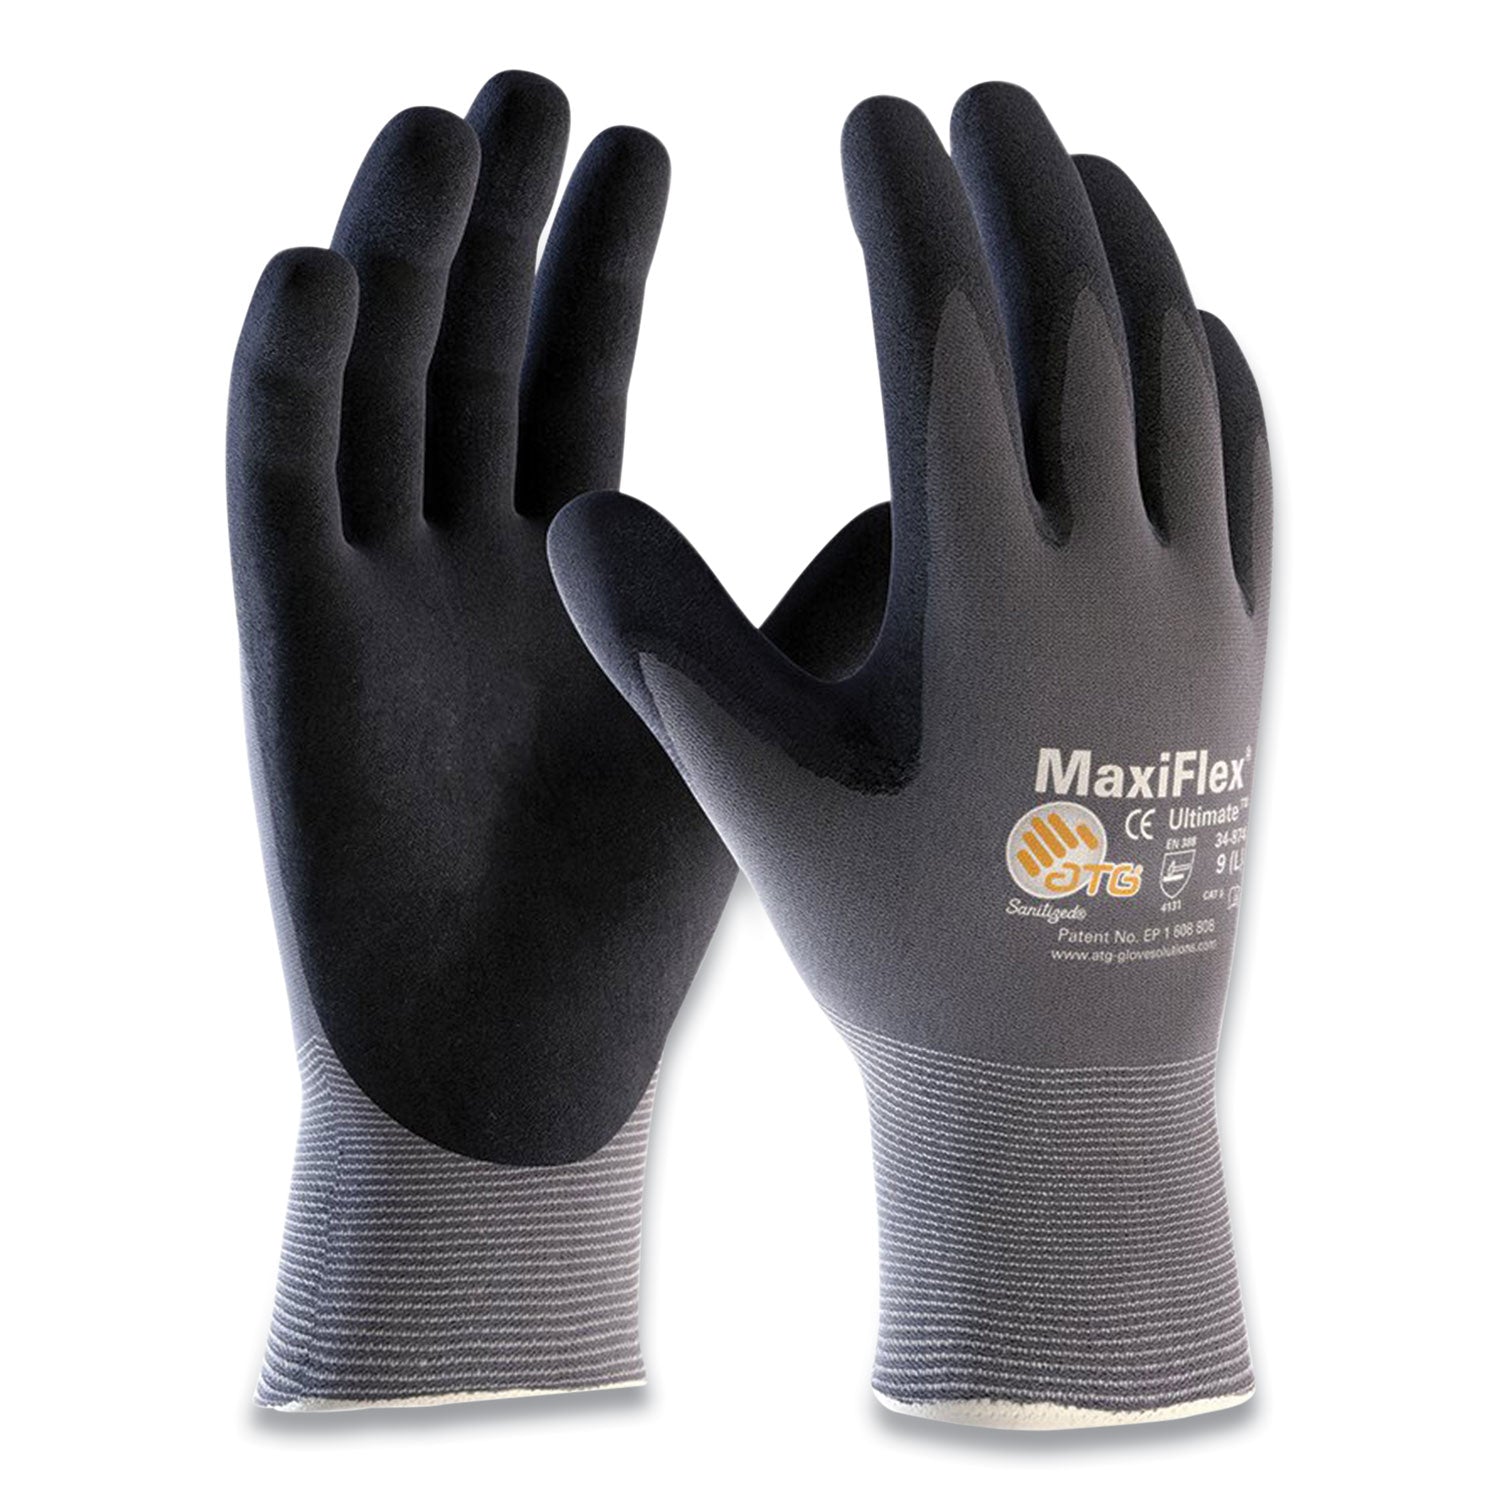 ultimate-seamless-knit-nylon-gloves-nitrile-coated-microfoam-grip-on-palm-and-fingers-x-large-gray-12-pairs_pid34874xl - 1